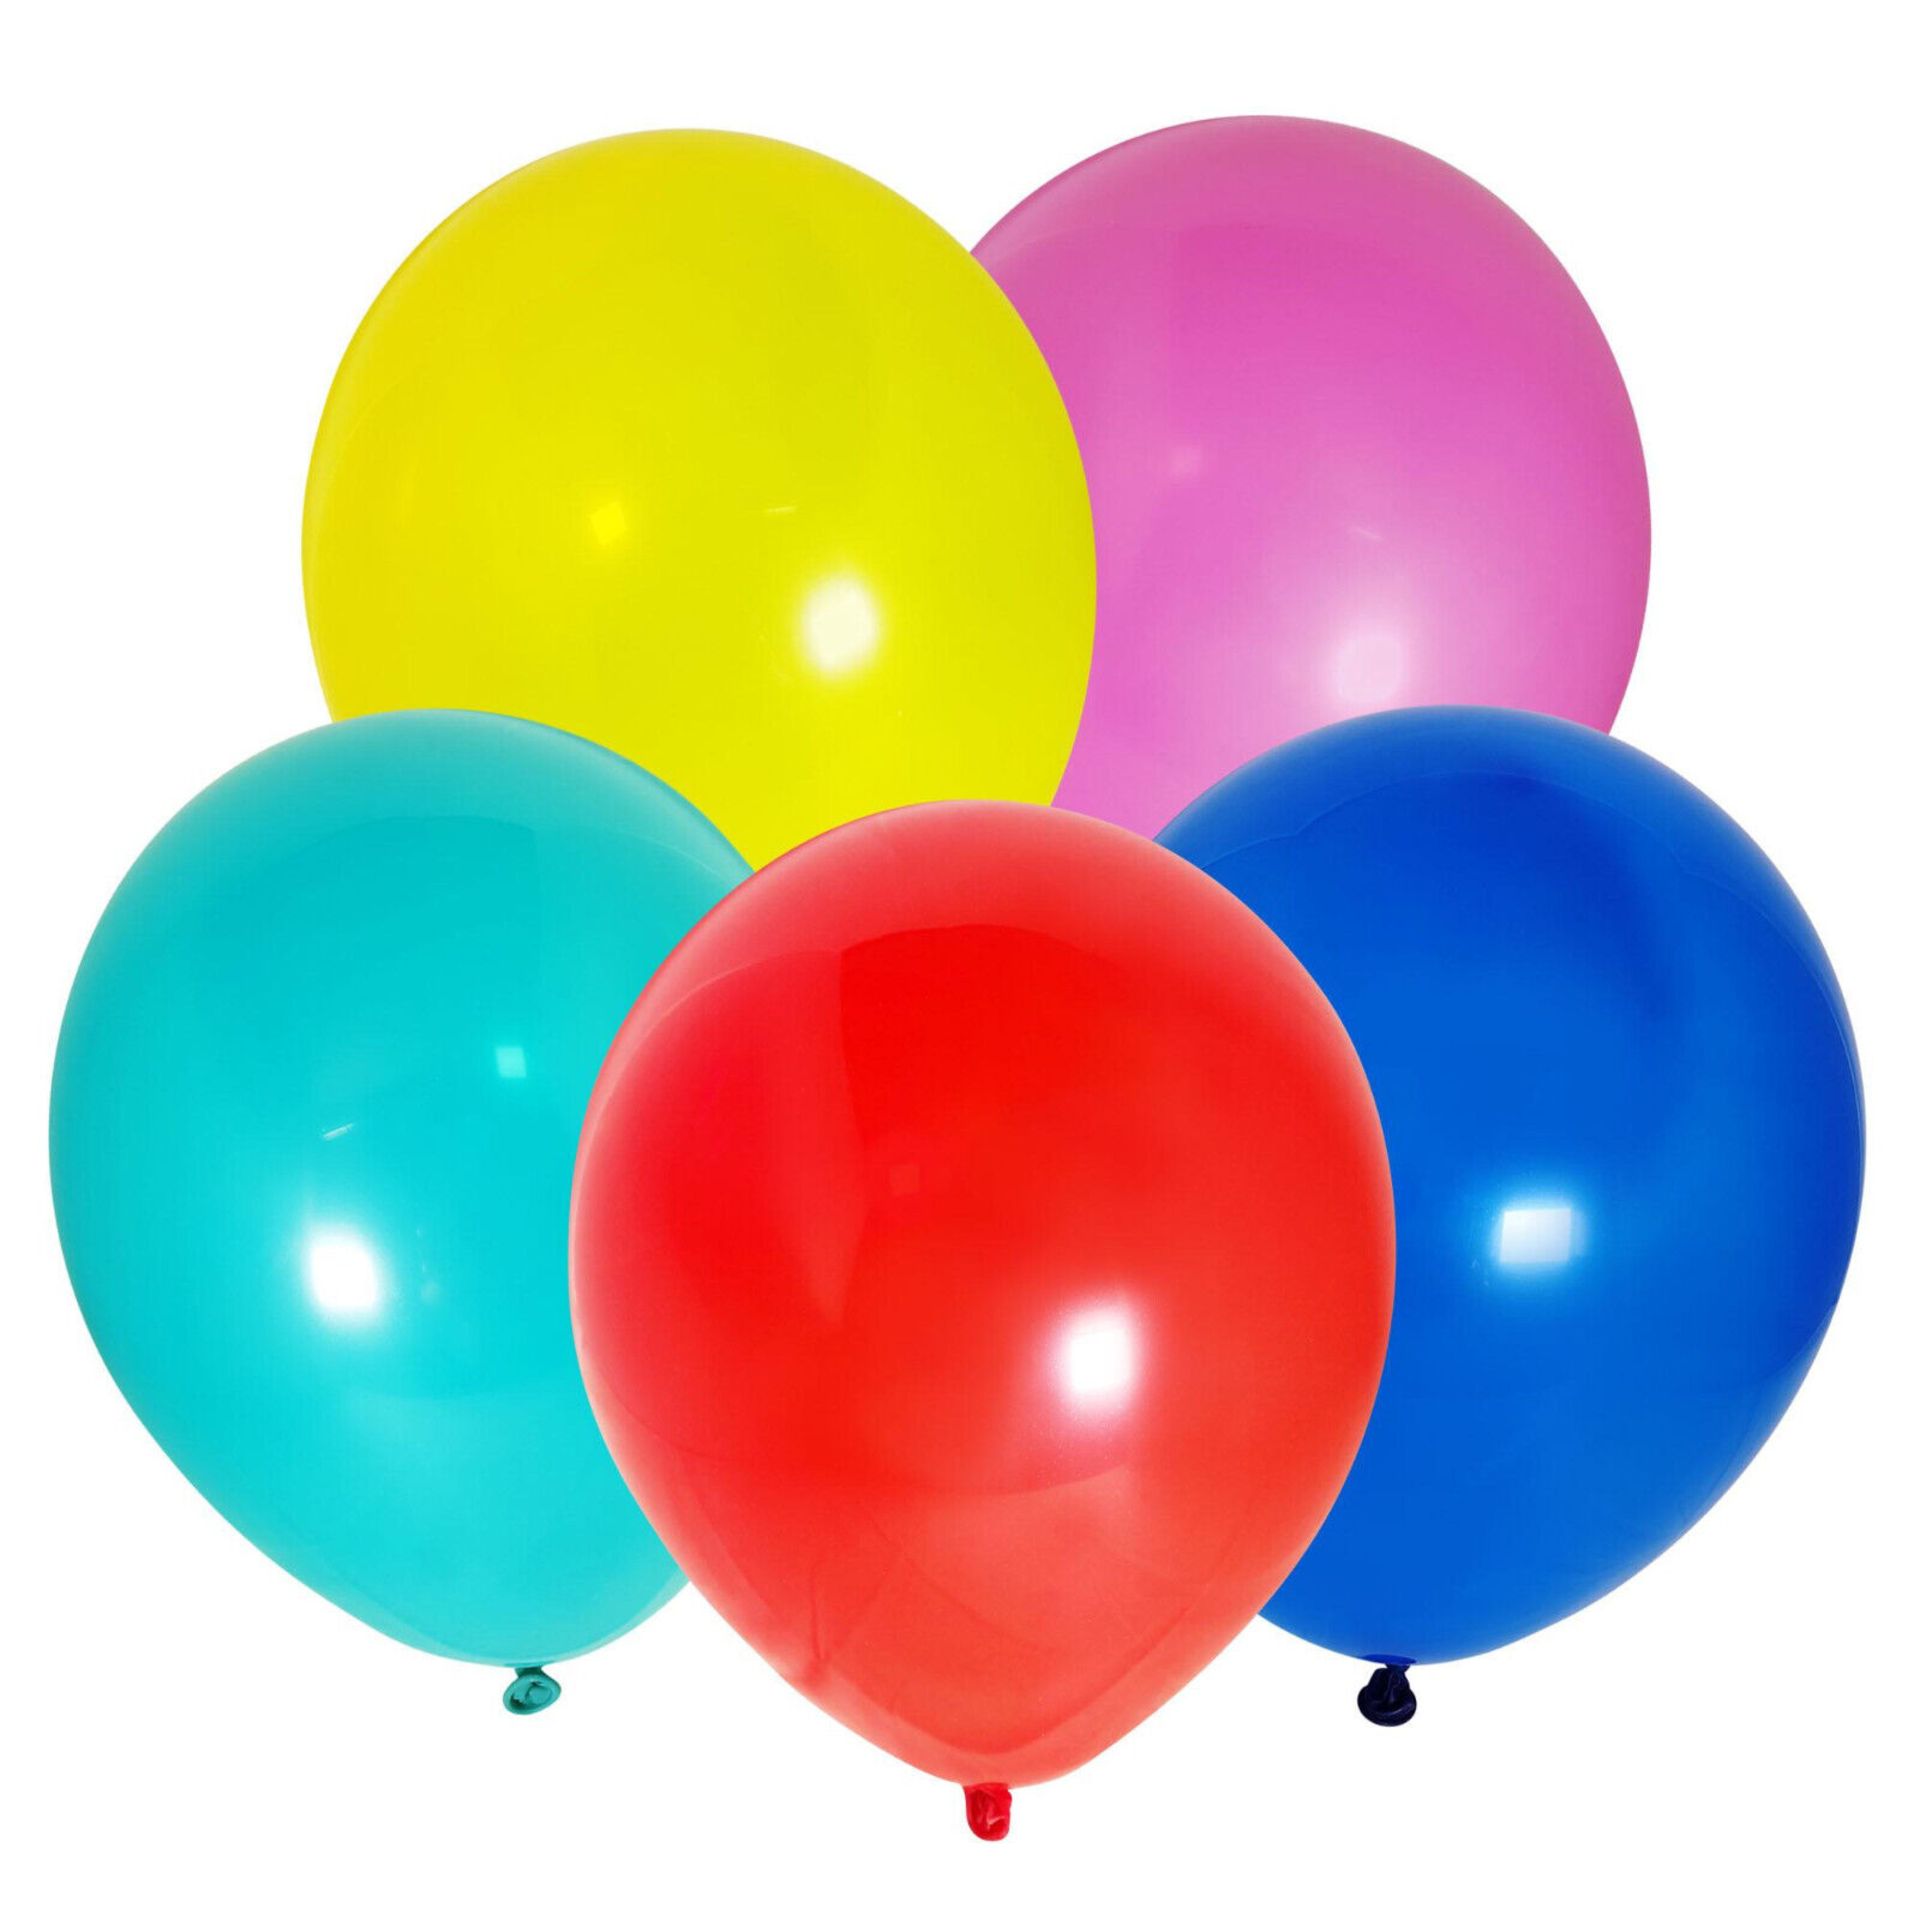 500X NEW 9"&6" - 24 PACK ASSORTED COLOURED BALLOONS - Image 4 of 4